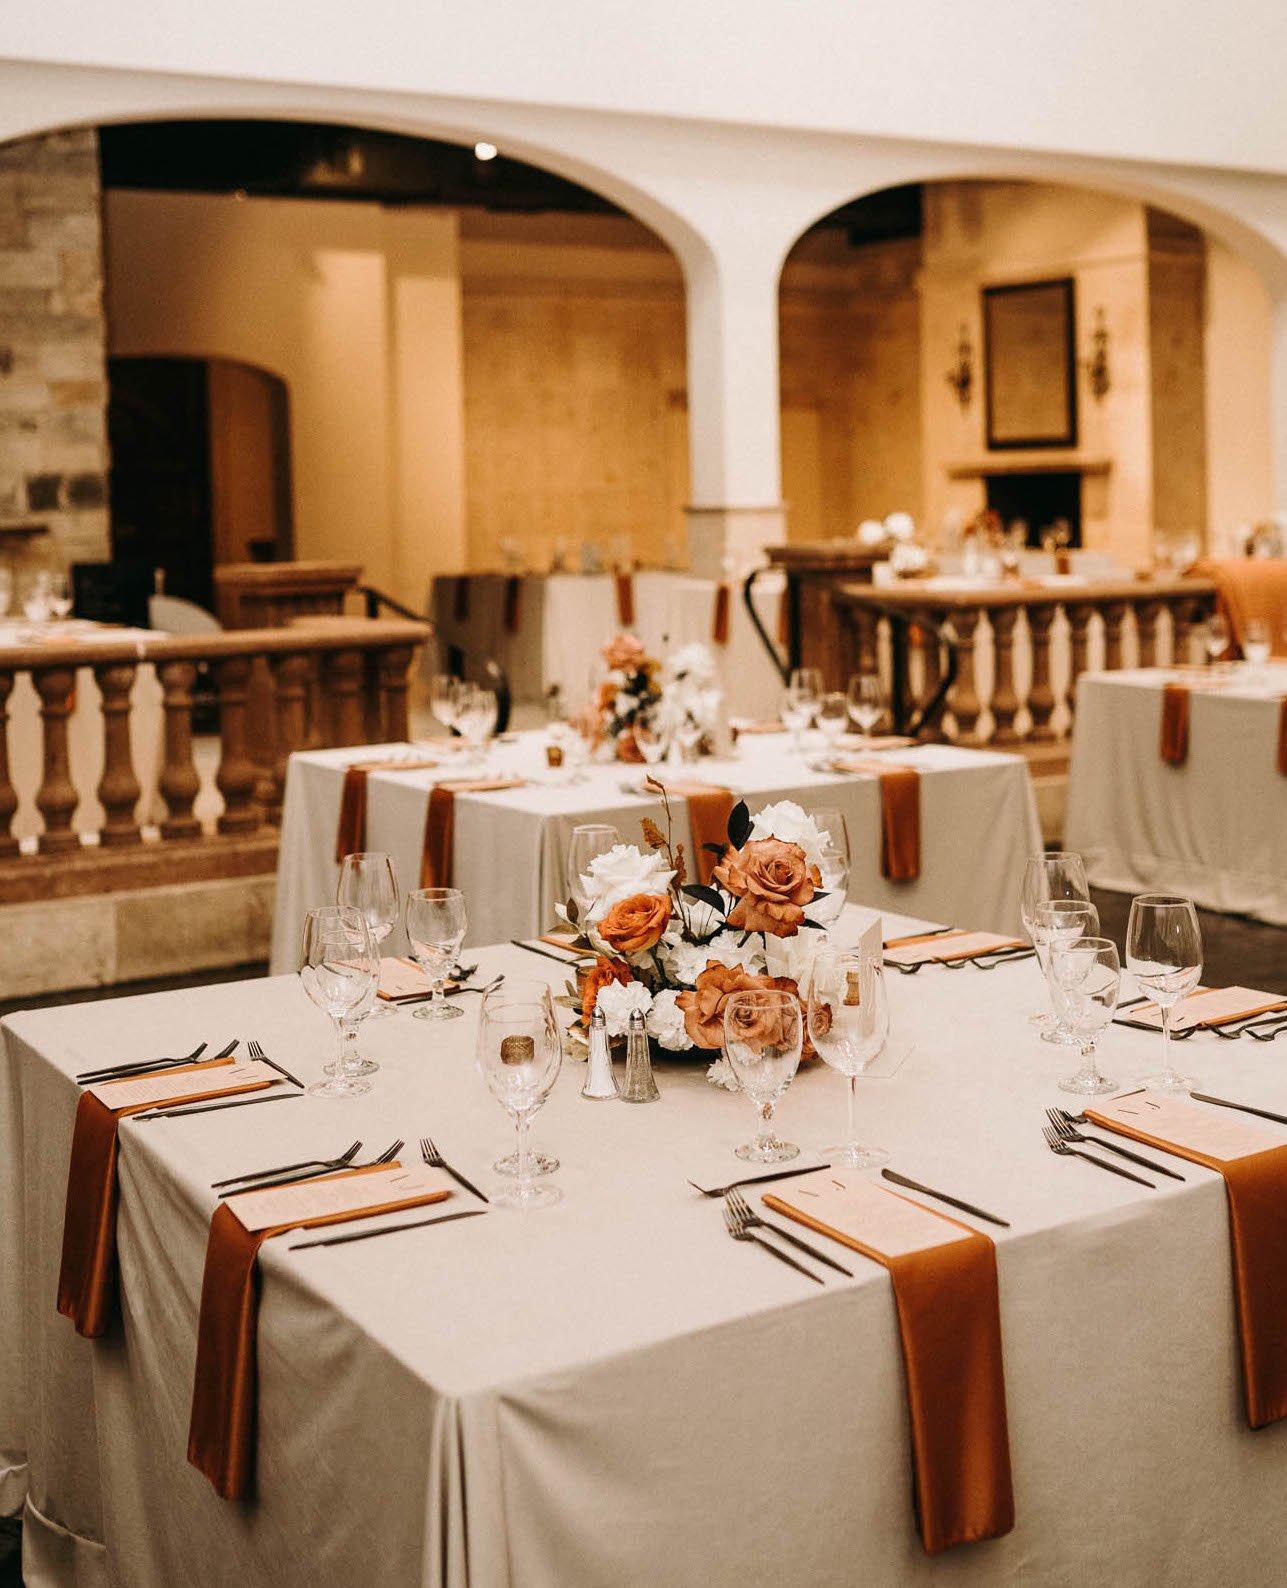 A wedding reception is decorated with burnt orange accents and centerpieces with white and orange flowers. The reception is taking place at The Bell Tower on 34th in Houston, TX.